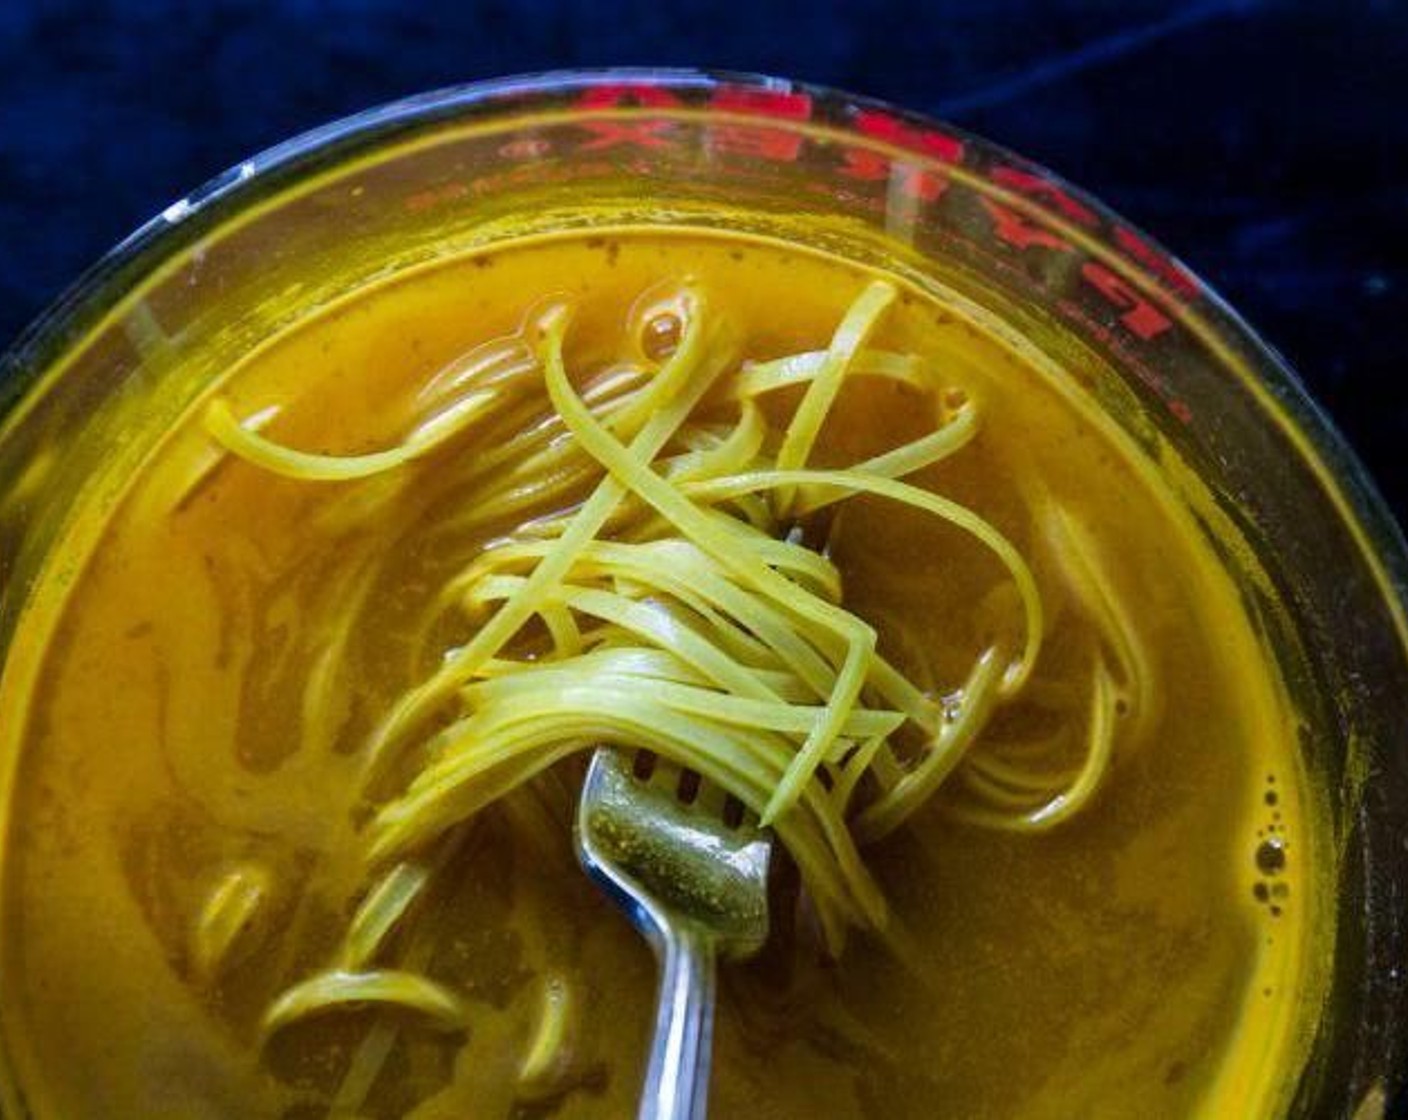 step 1 In a large mixing bowl, combine Ground Turmeric (2 Tbsp), Kosher Salt (1/4 tsp), Rice Noodles (1 pckg), and enough boiling water to cover the rice noodles. Let the noodles soak in the water for about 20 minutes. Once softened, drain the noodles and set aside.